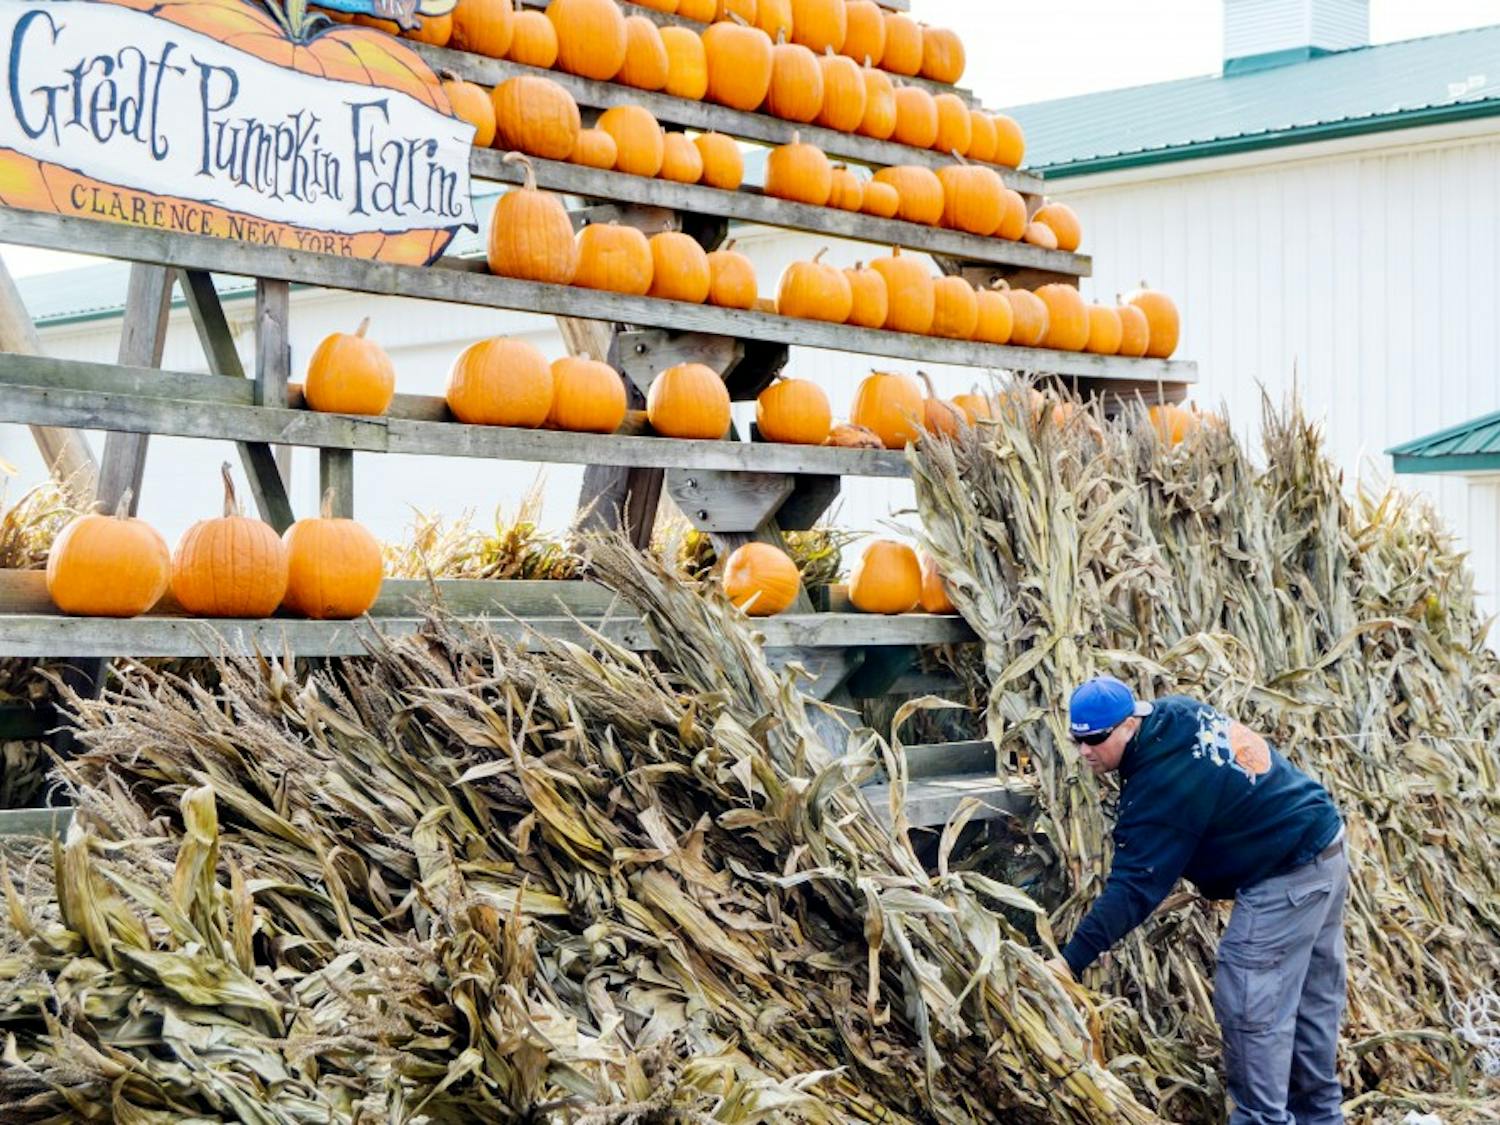 Pumpkin patches around Buffalo, like The Great Pumpkin Farm, are a perfect Halloween activity to try if you’re not a big fan of haunted houses or other scary Halloween activities.